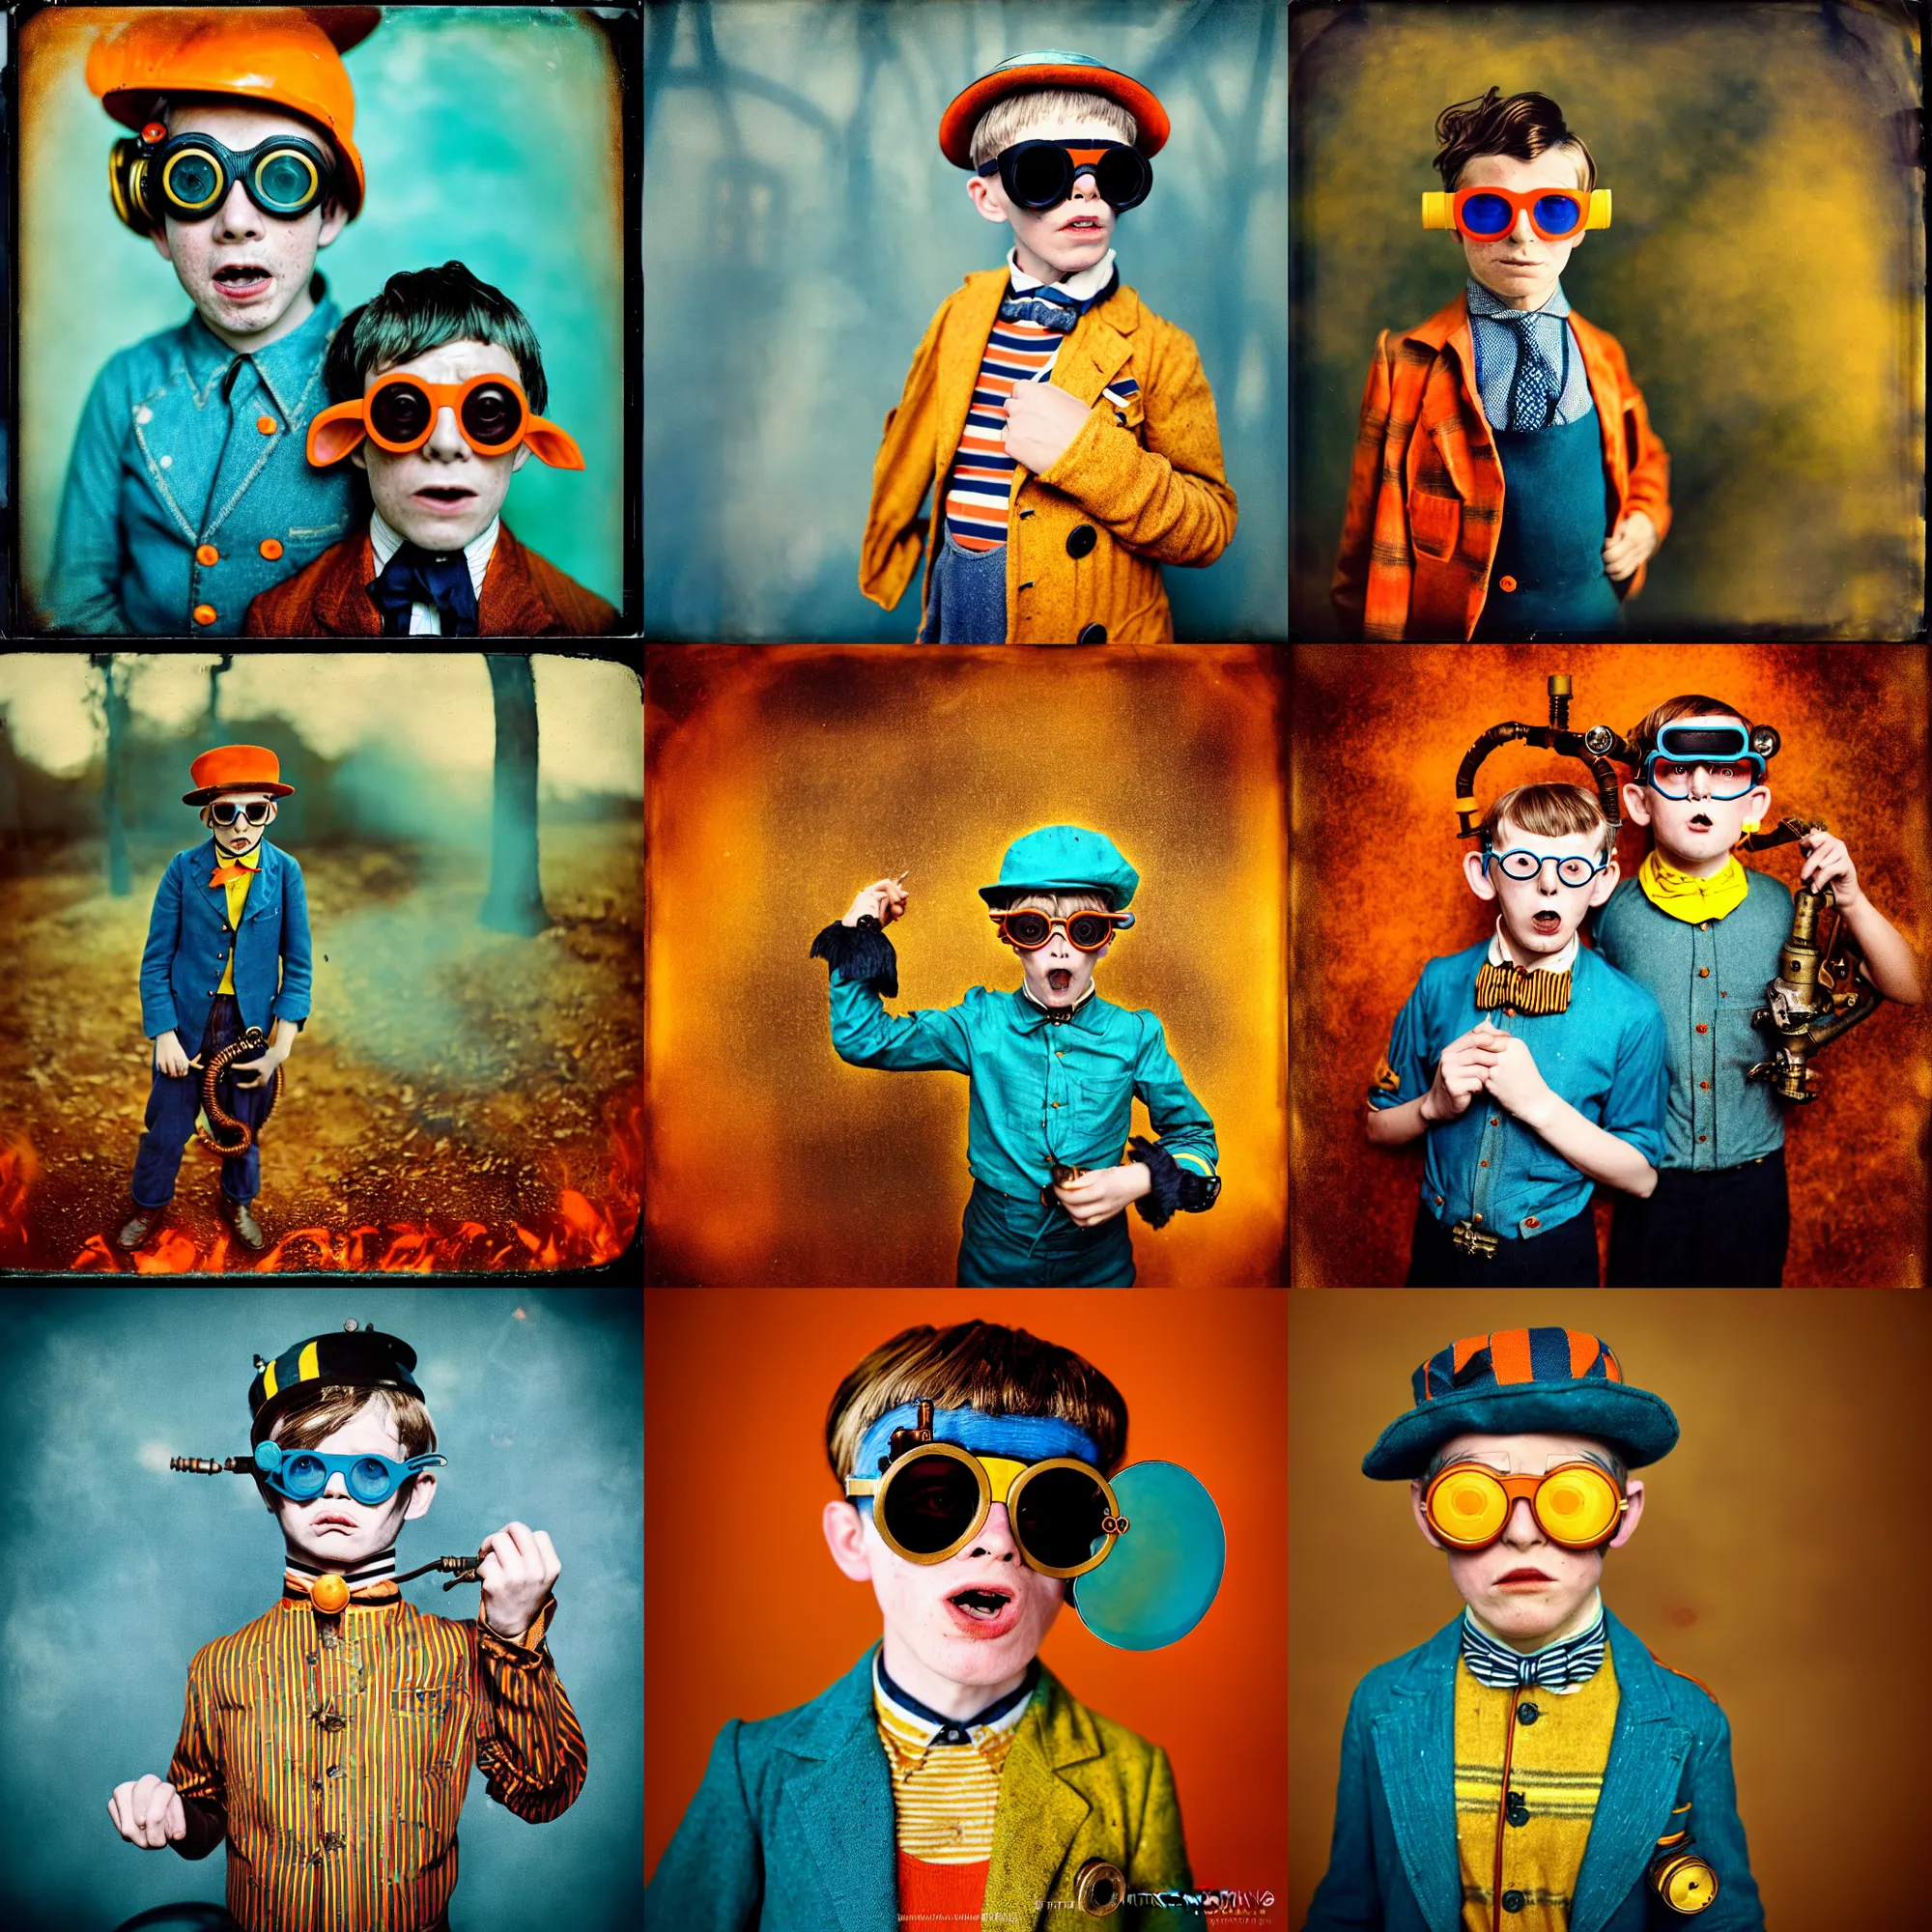 Prompt: kodak portra 4 0 0, wetplate, motion blur, face portrait photo of 8 year old angry steampunk boy in 1 9 2 0 s in hell fire, wearing a yellow blue striped monkey, 1 9 2 0 s cloth style, 1 9 2 0 s hairstyle, coloured in teal and orange, funny sunglasses, by britt marling, sparkle storm